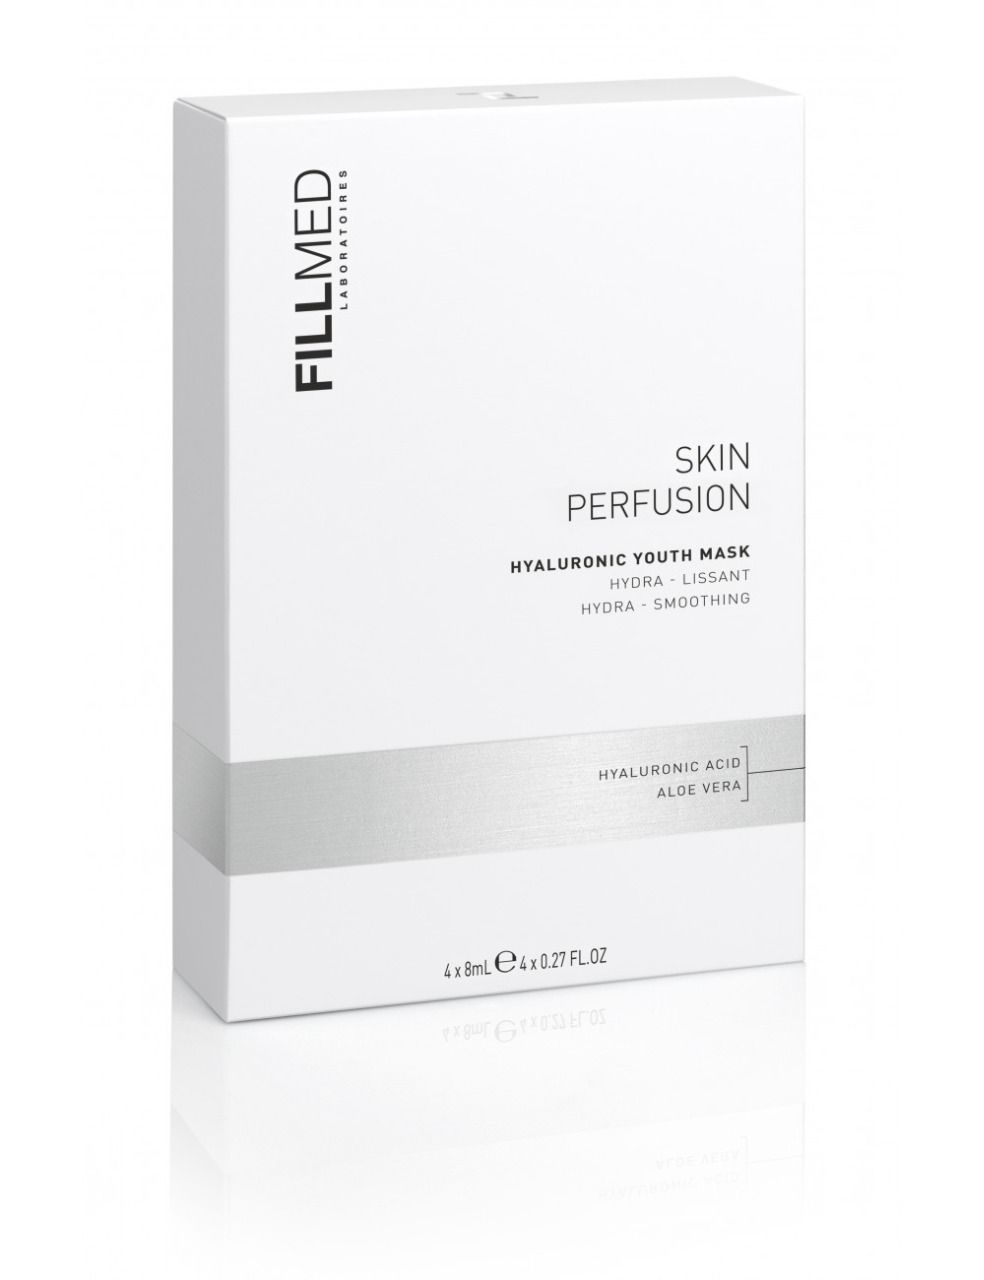 Fillmed skin perfusion hyaluronic youth mask